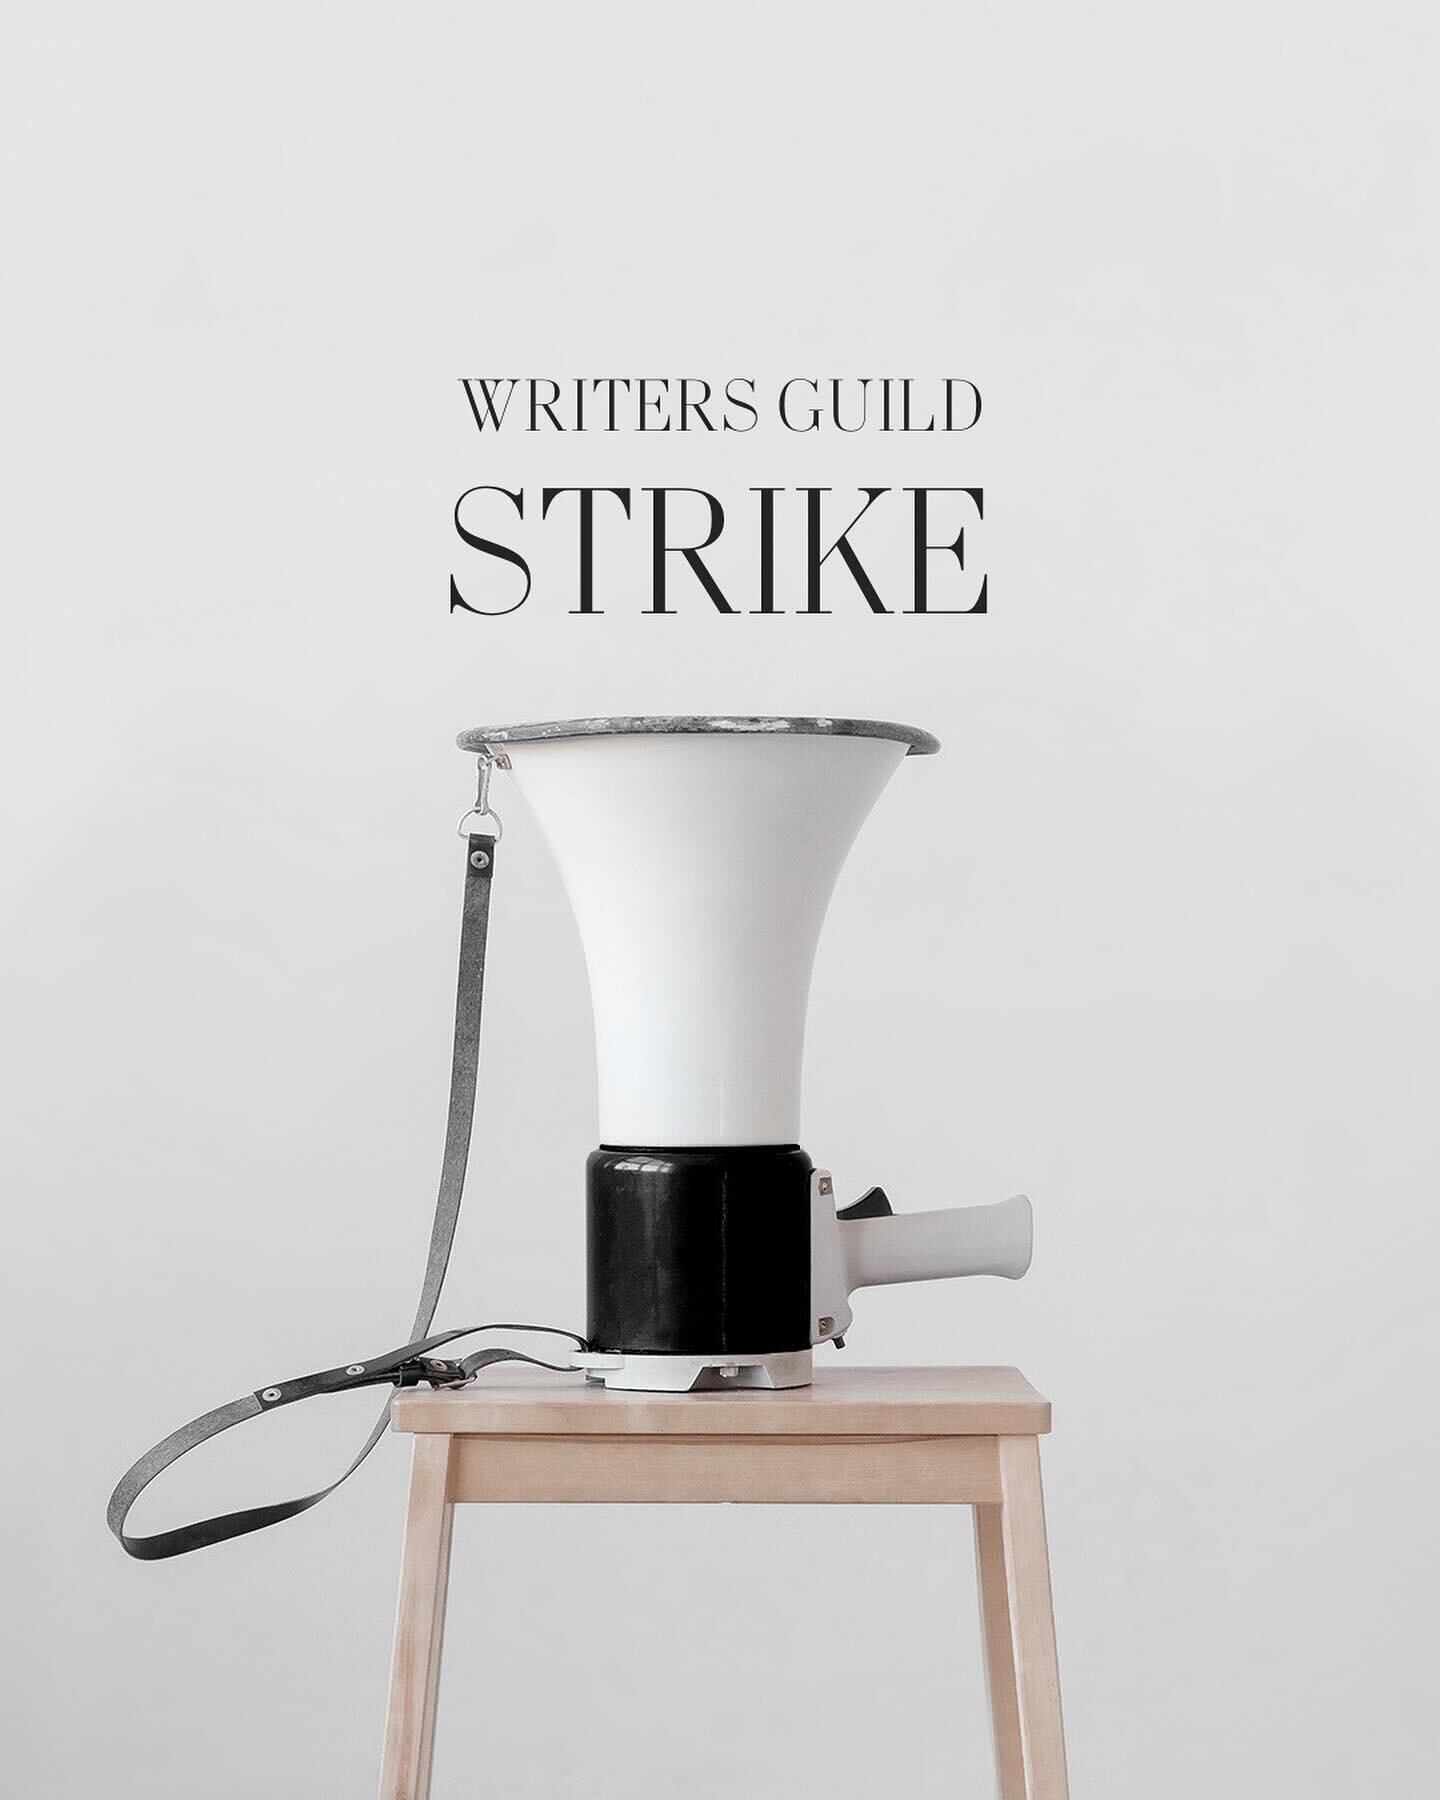 The Writers Guild of America initiated the largest disruption of film and TV production in over 60 years. Swipe to learn more about why the writers are striking &rarr;

#WGAOnStrike #SAGAFTRAOnStrike #FilmBusiness #EntertainmentLaw #lawyersofinstagra